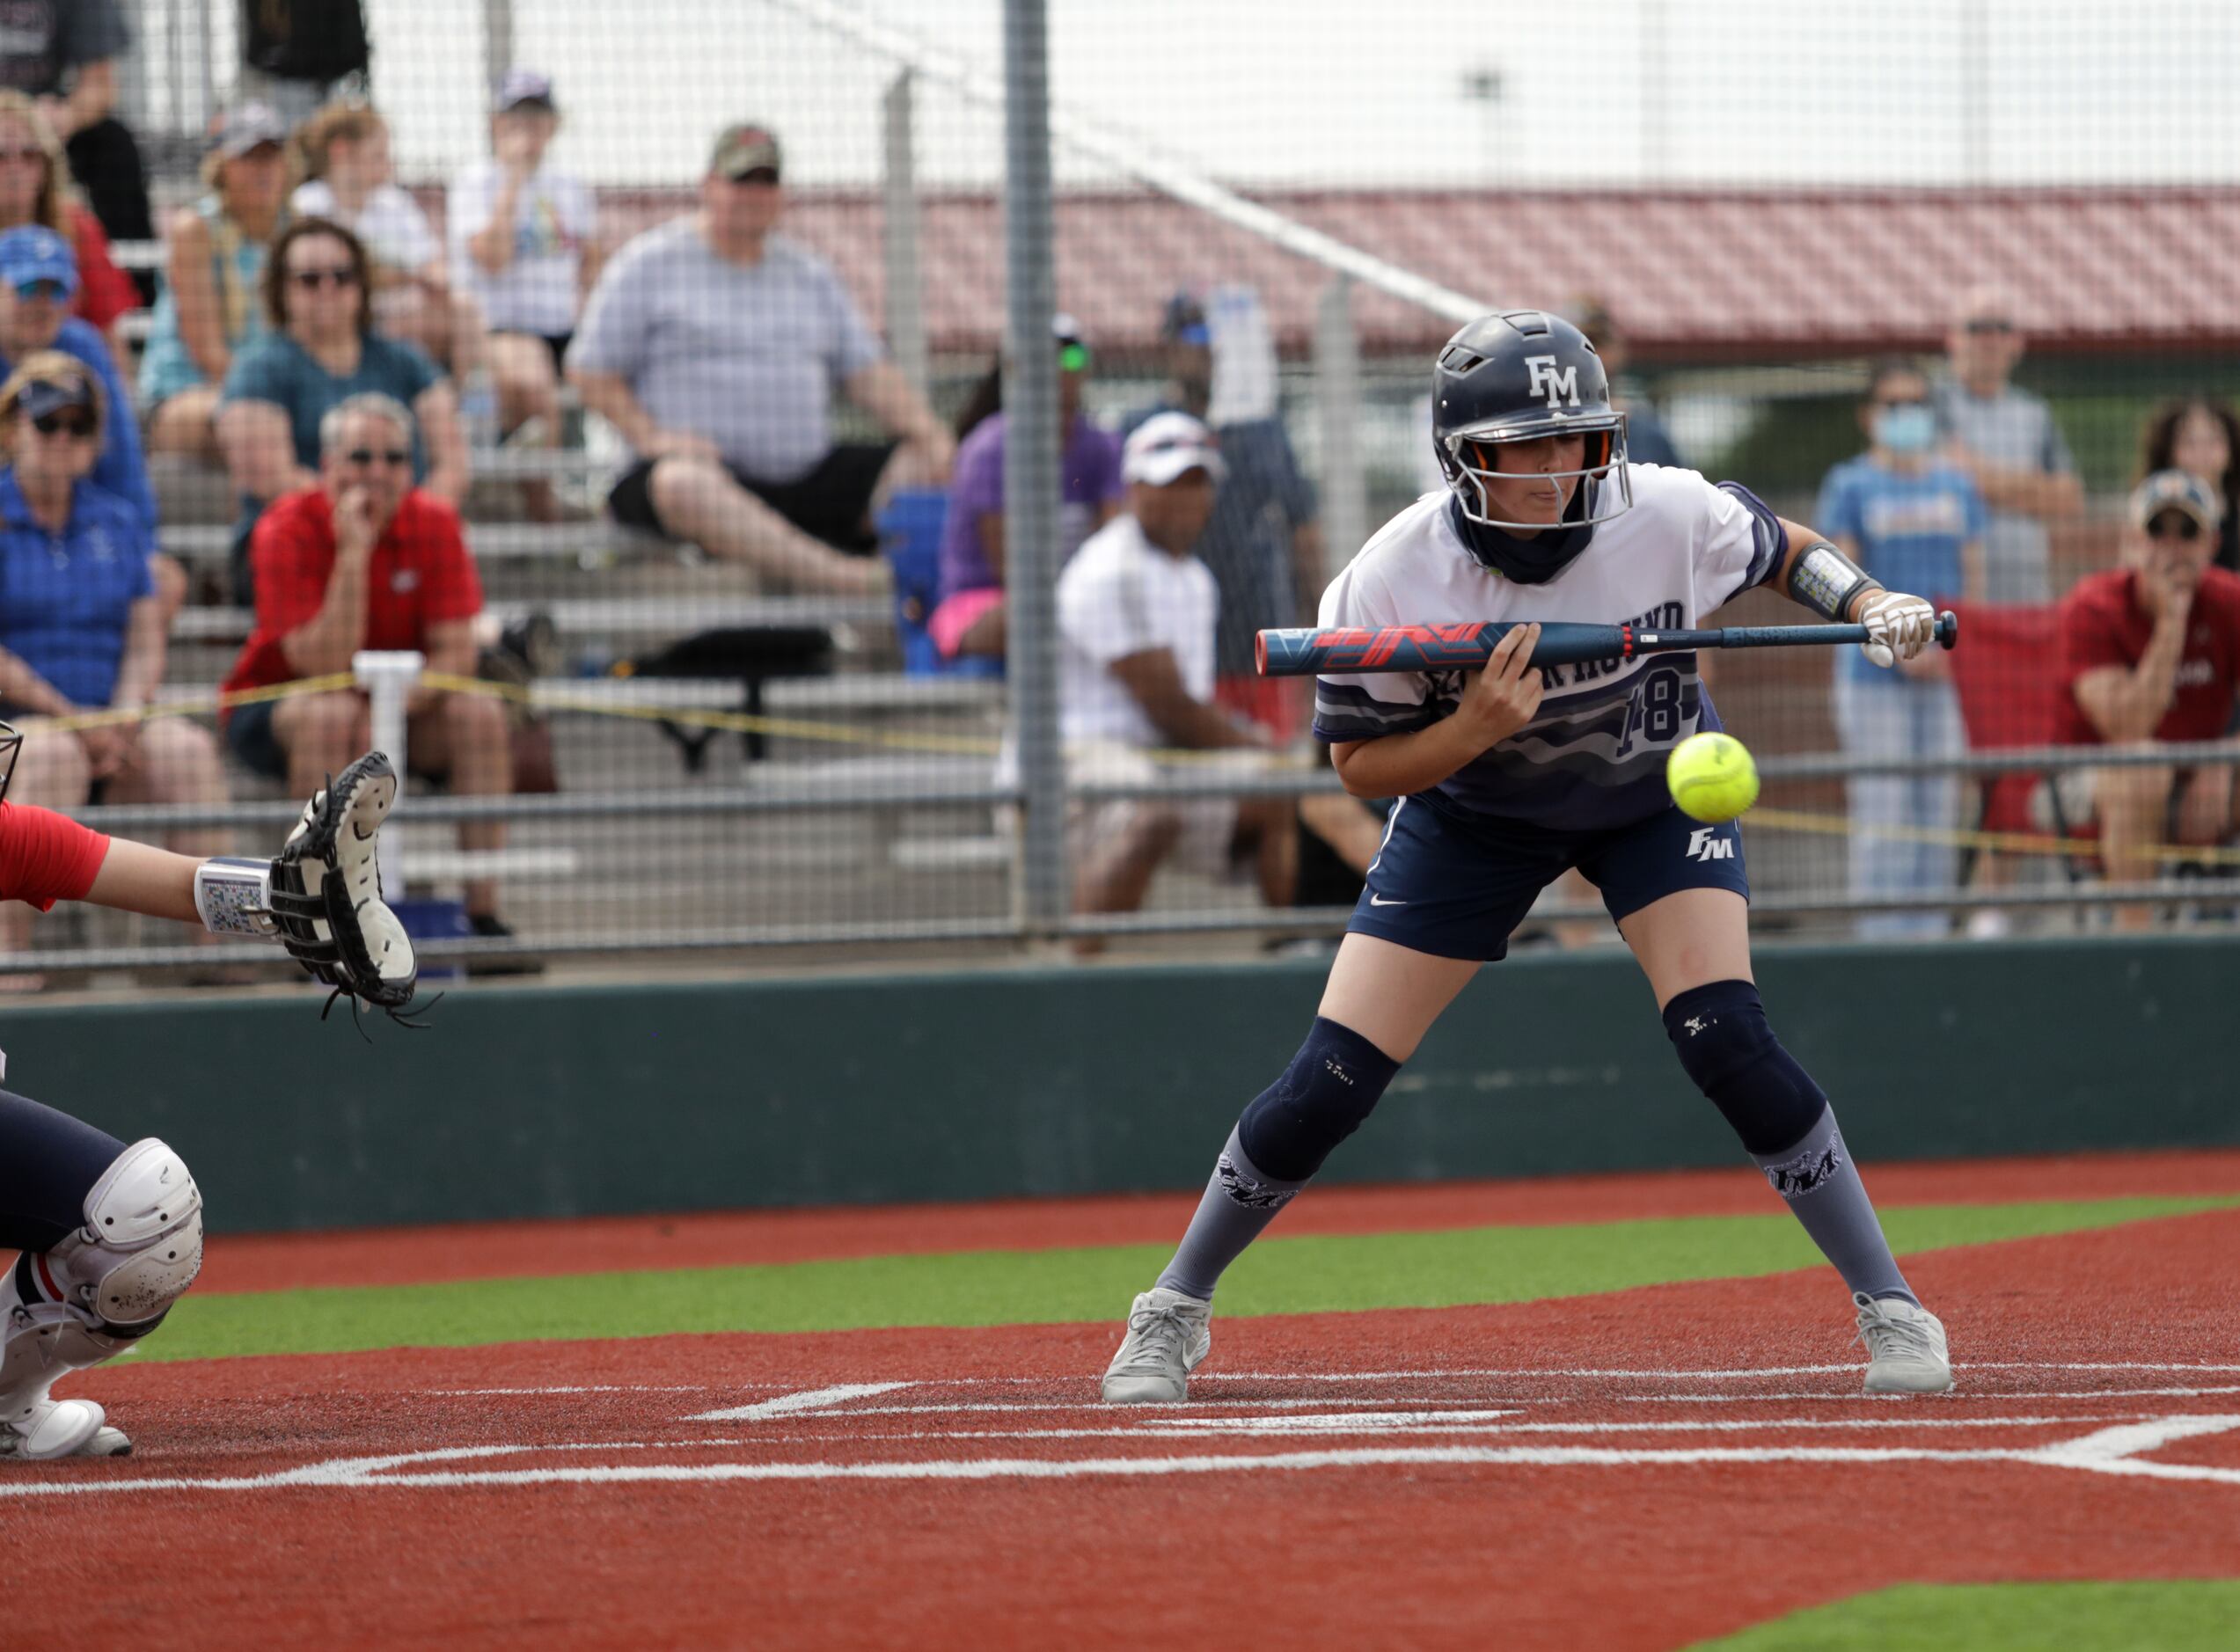 Flower Mound High School player #18, Jordyn Holland, holds back from a bunt during a...